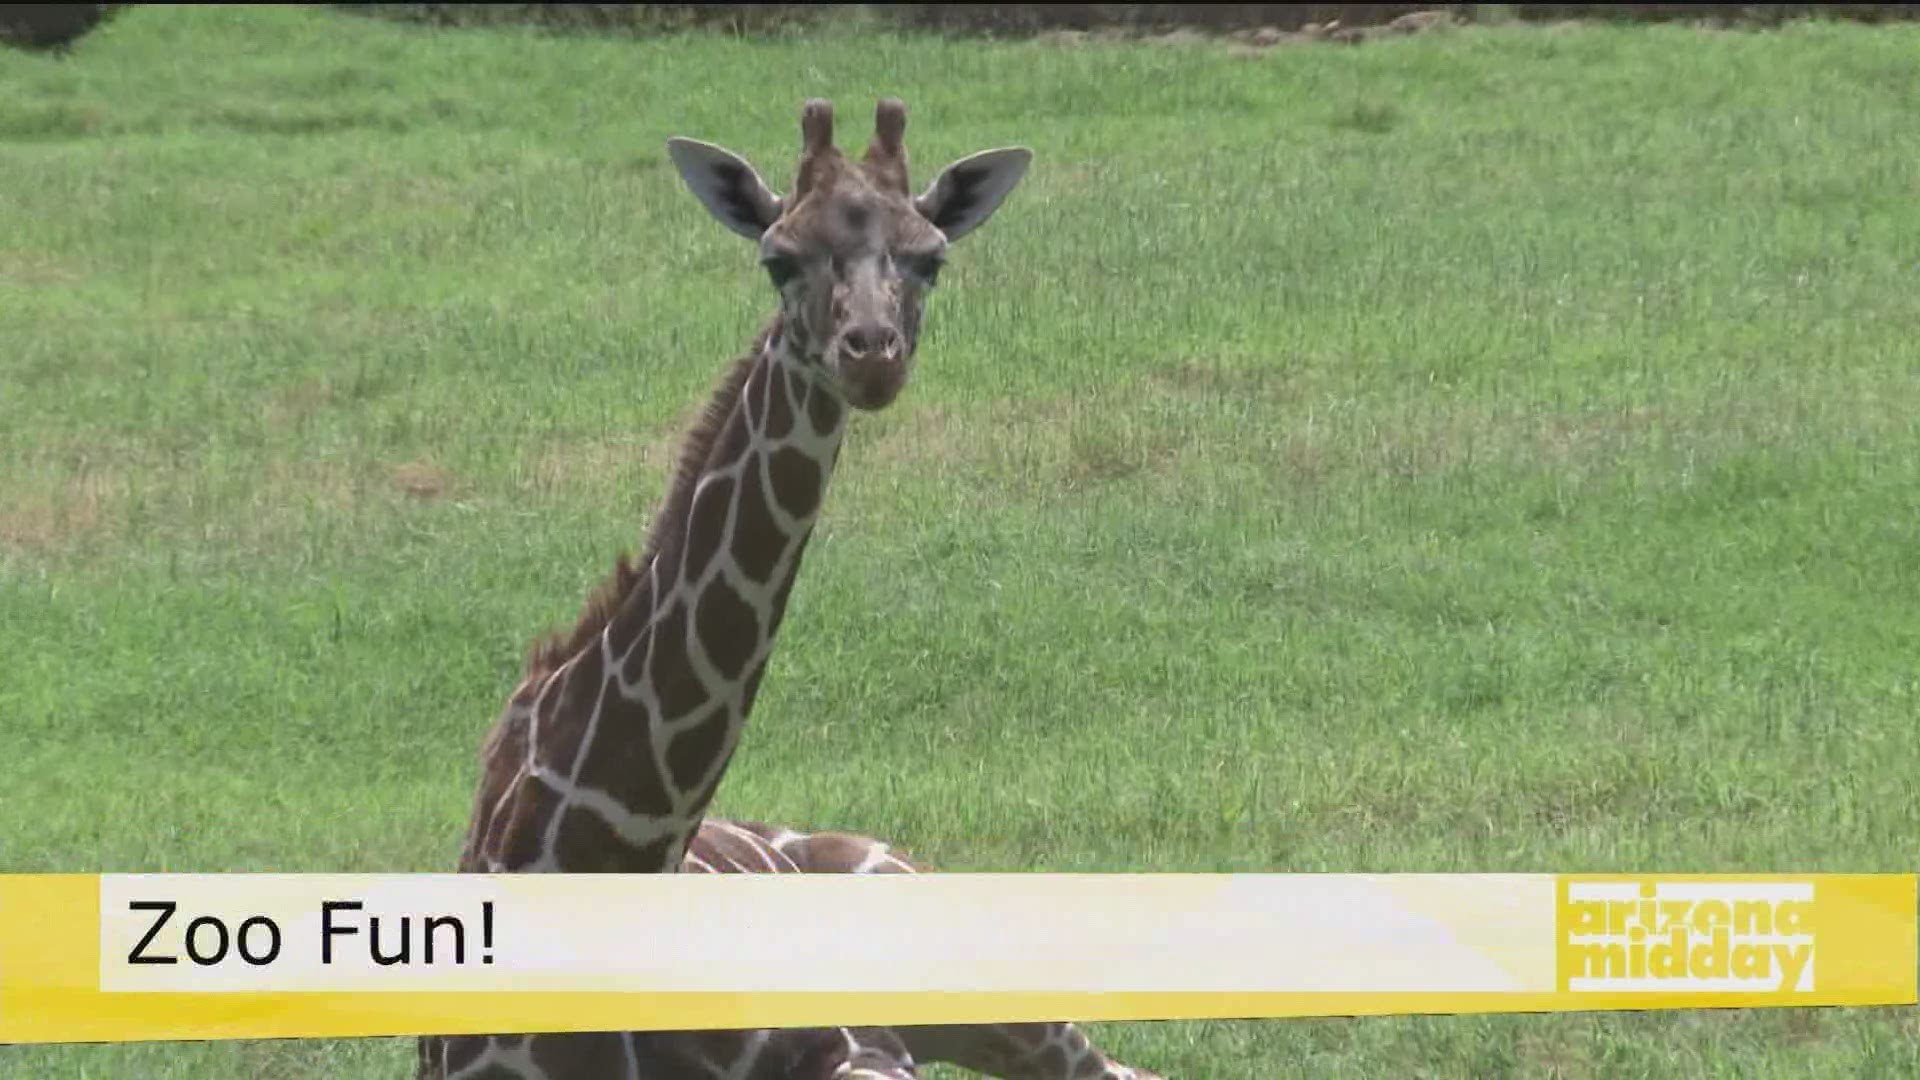 Kristy with the Wildlife World Zoo gives us a peek at the new giraffes at the zoo and give us an update on how you can interact virtually